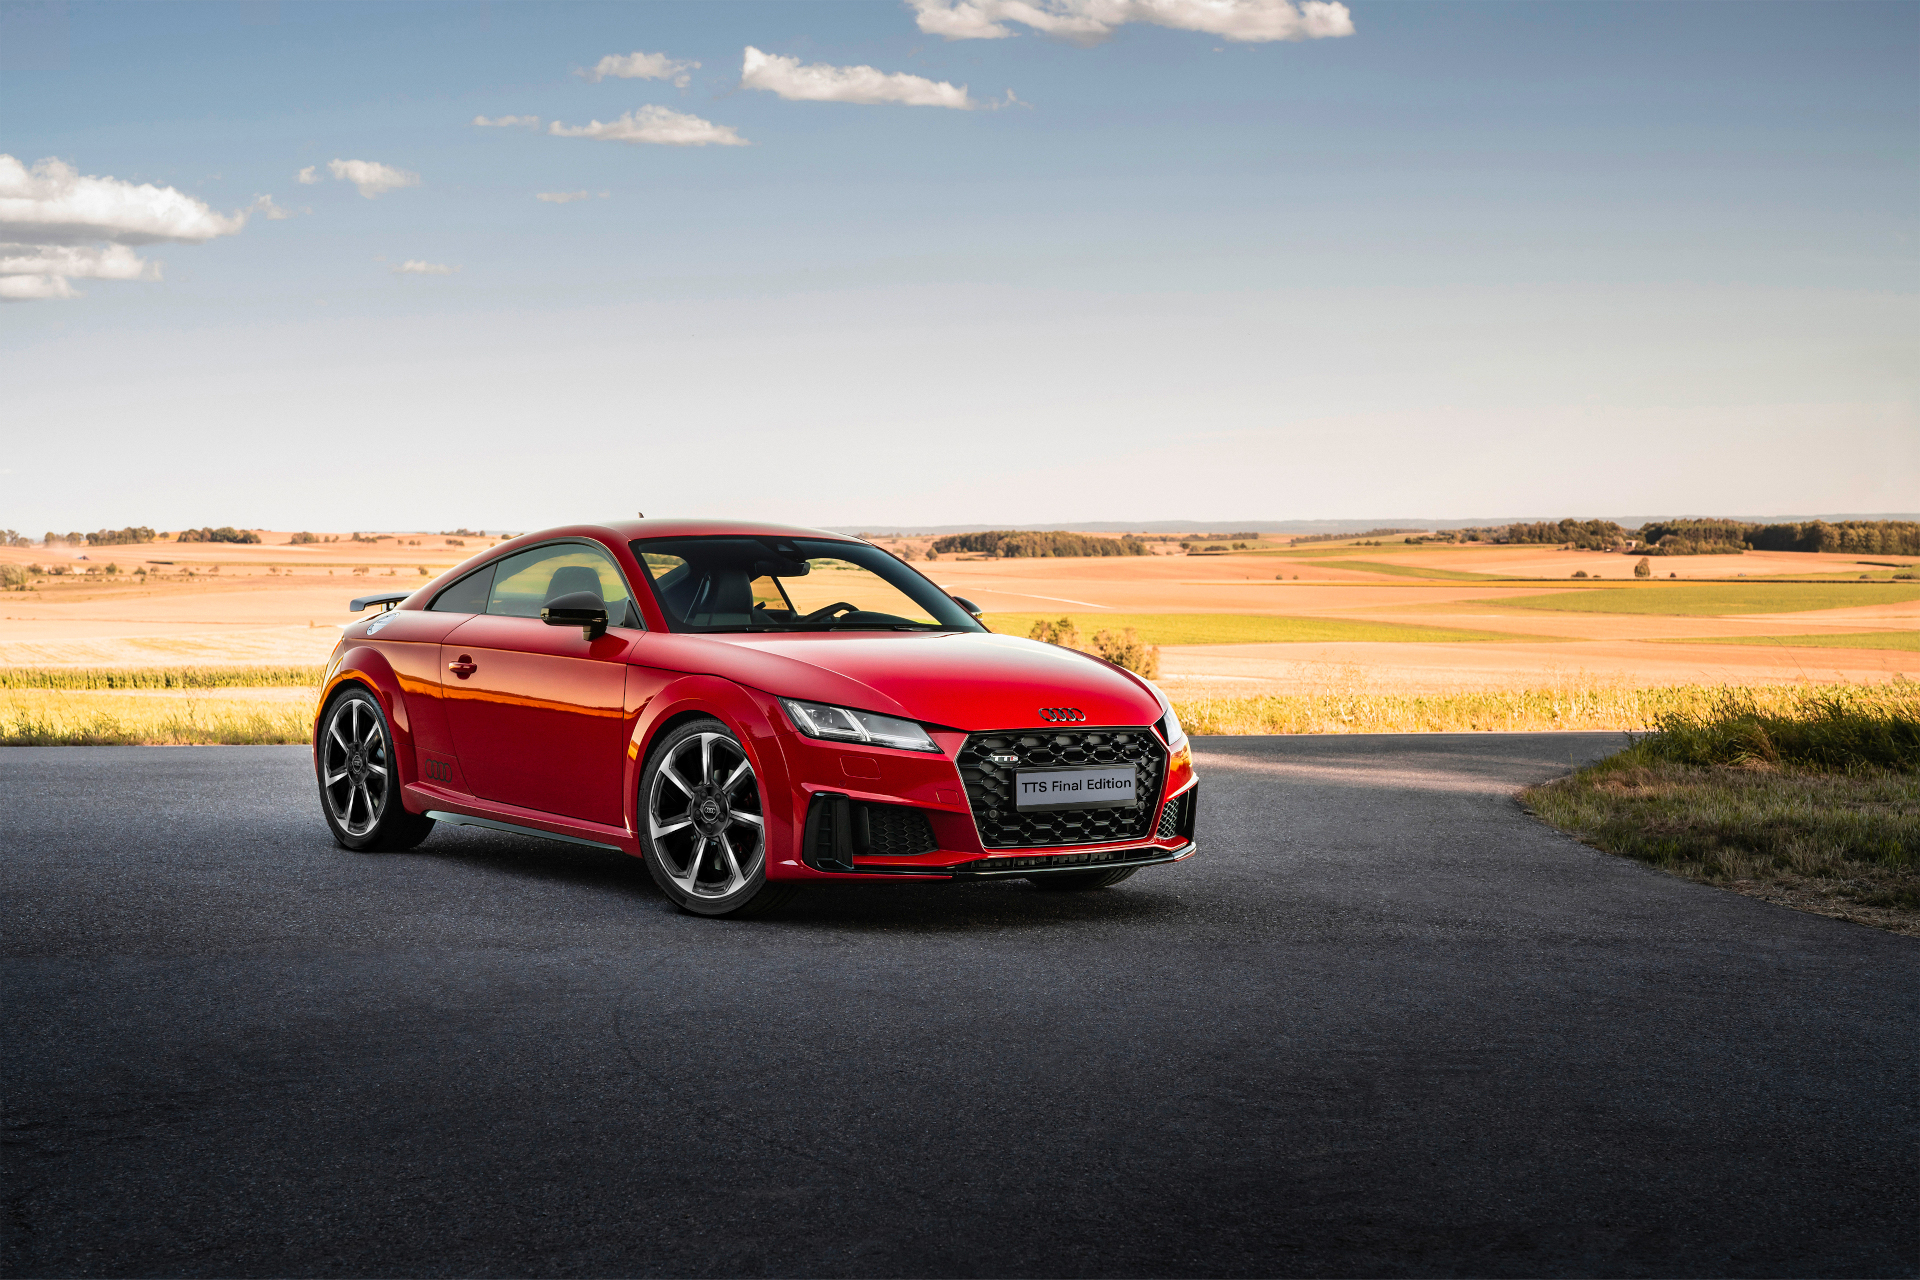 Audi UK announces TT Final Edition: 25 years of a design icon